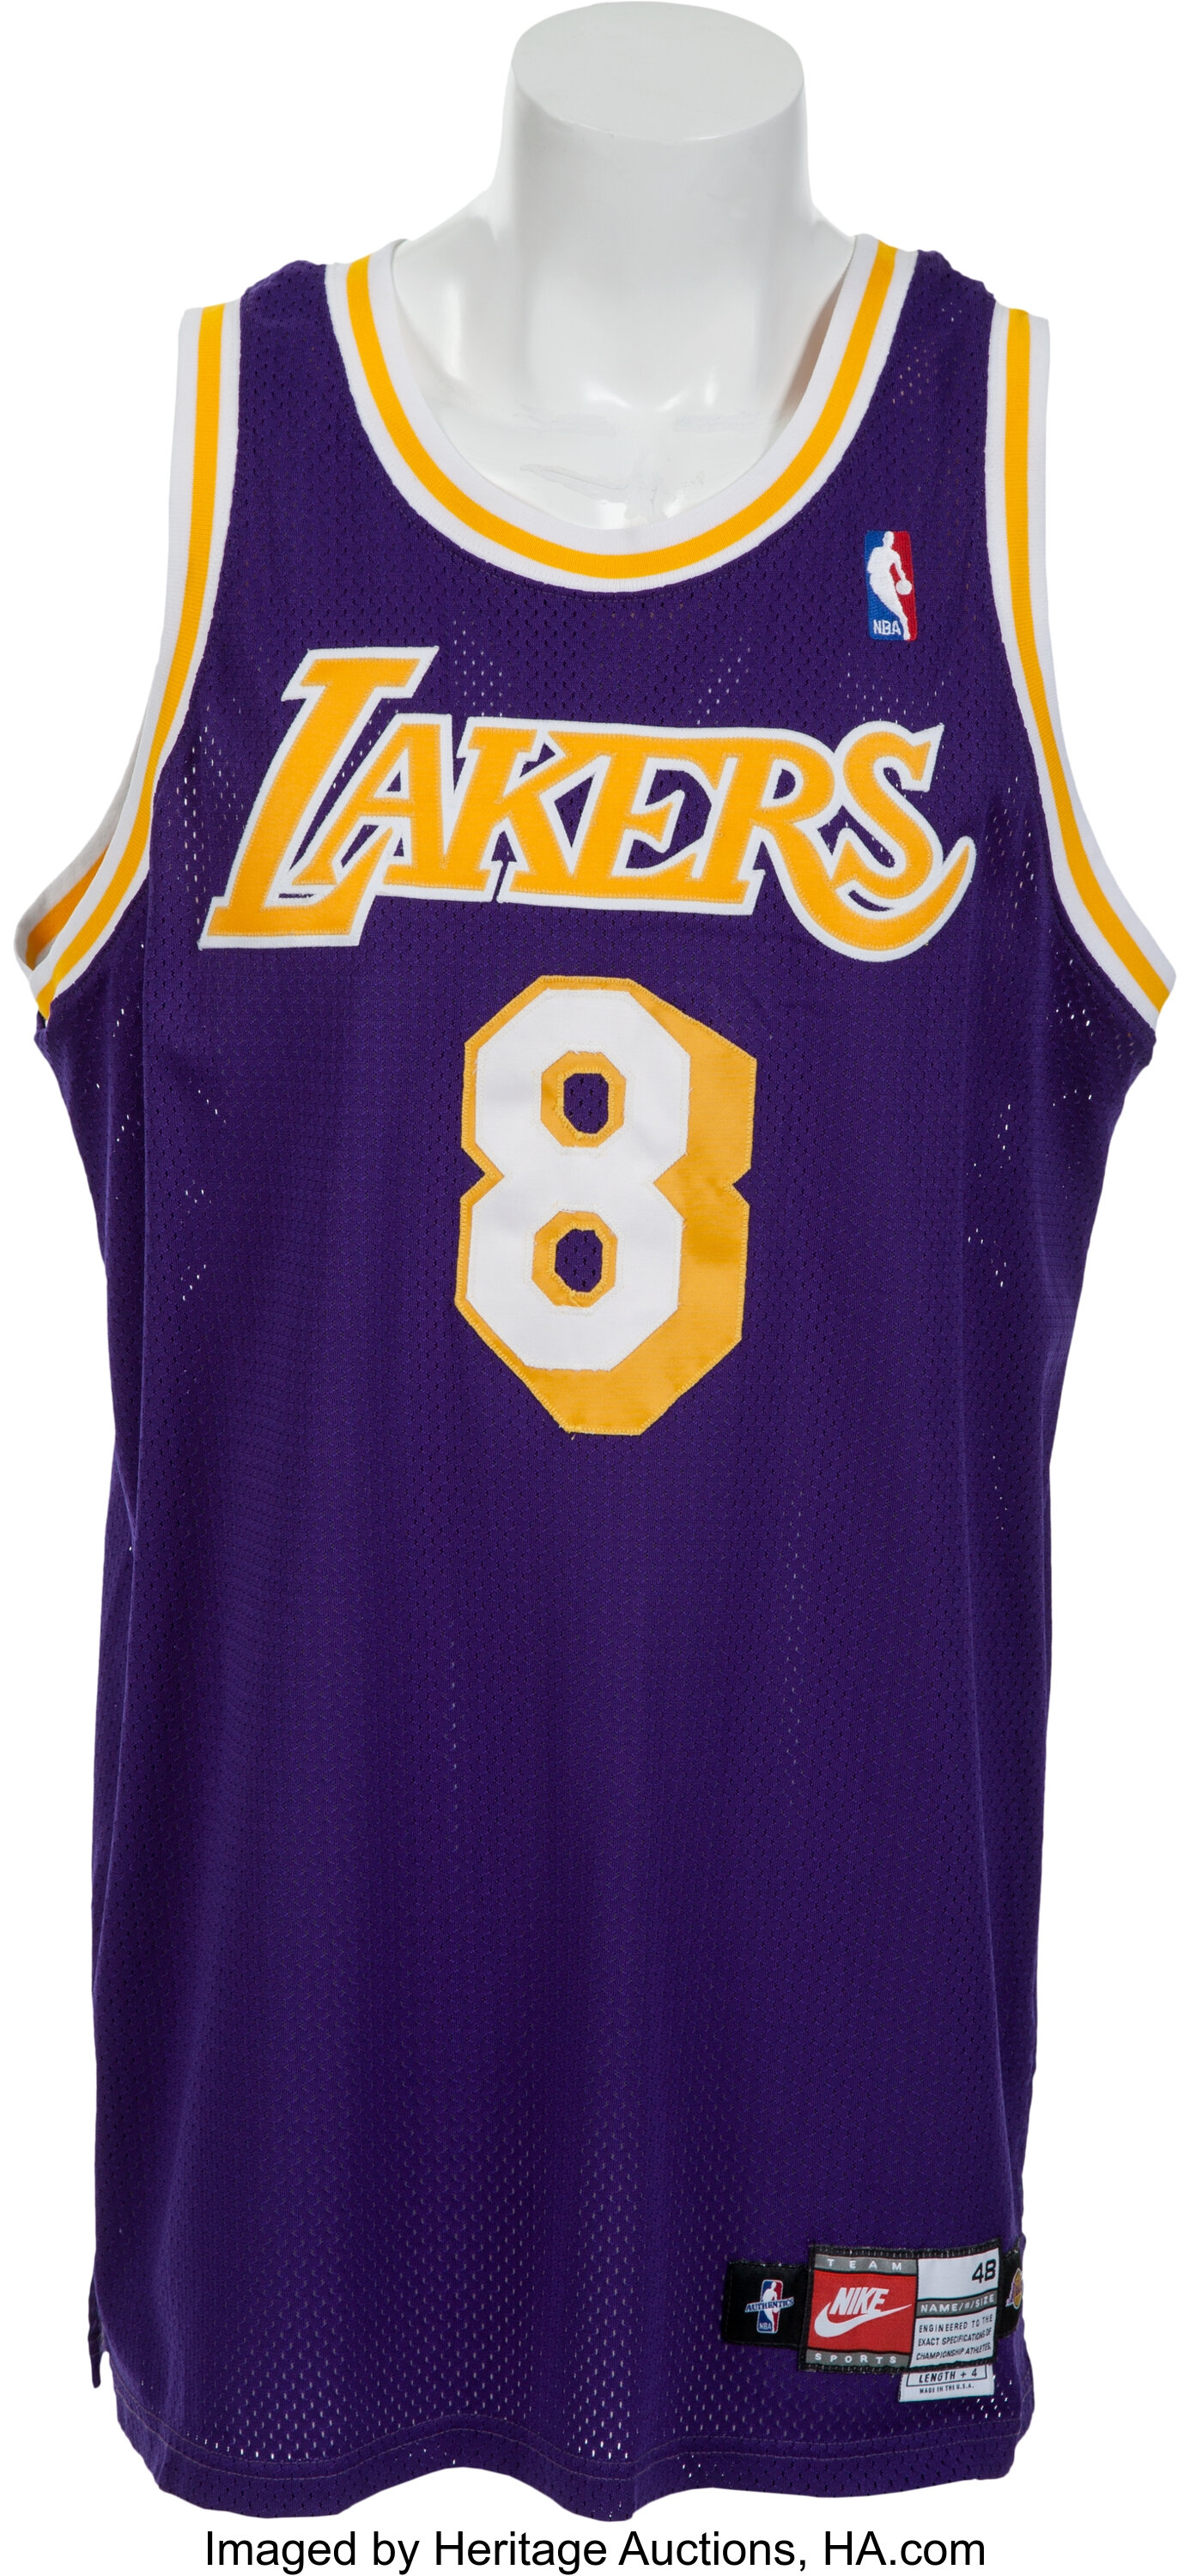 Kobe Bryant Los Angeles Lakers Game Worn Jersey From Final NBA